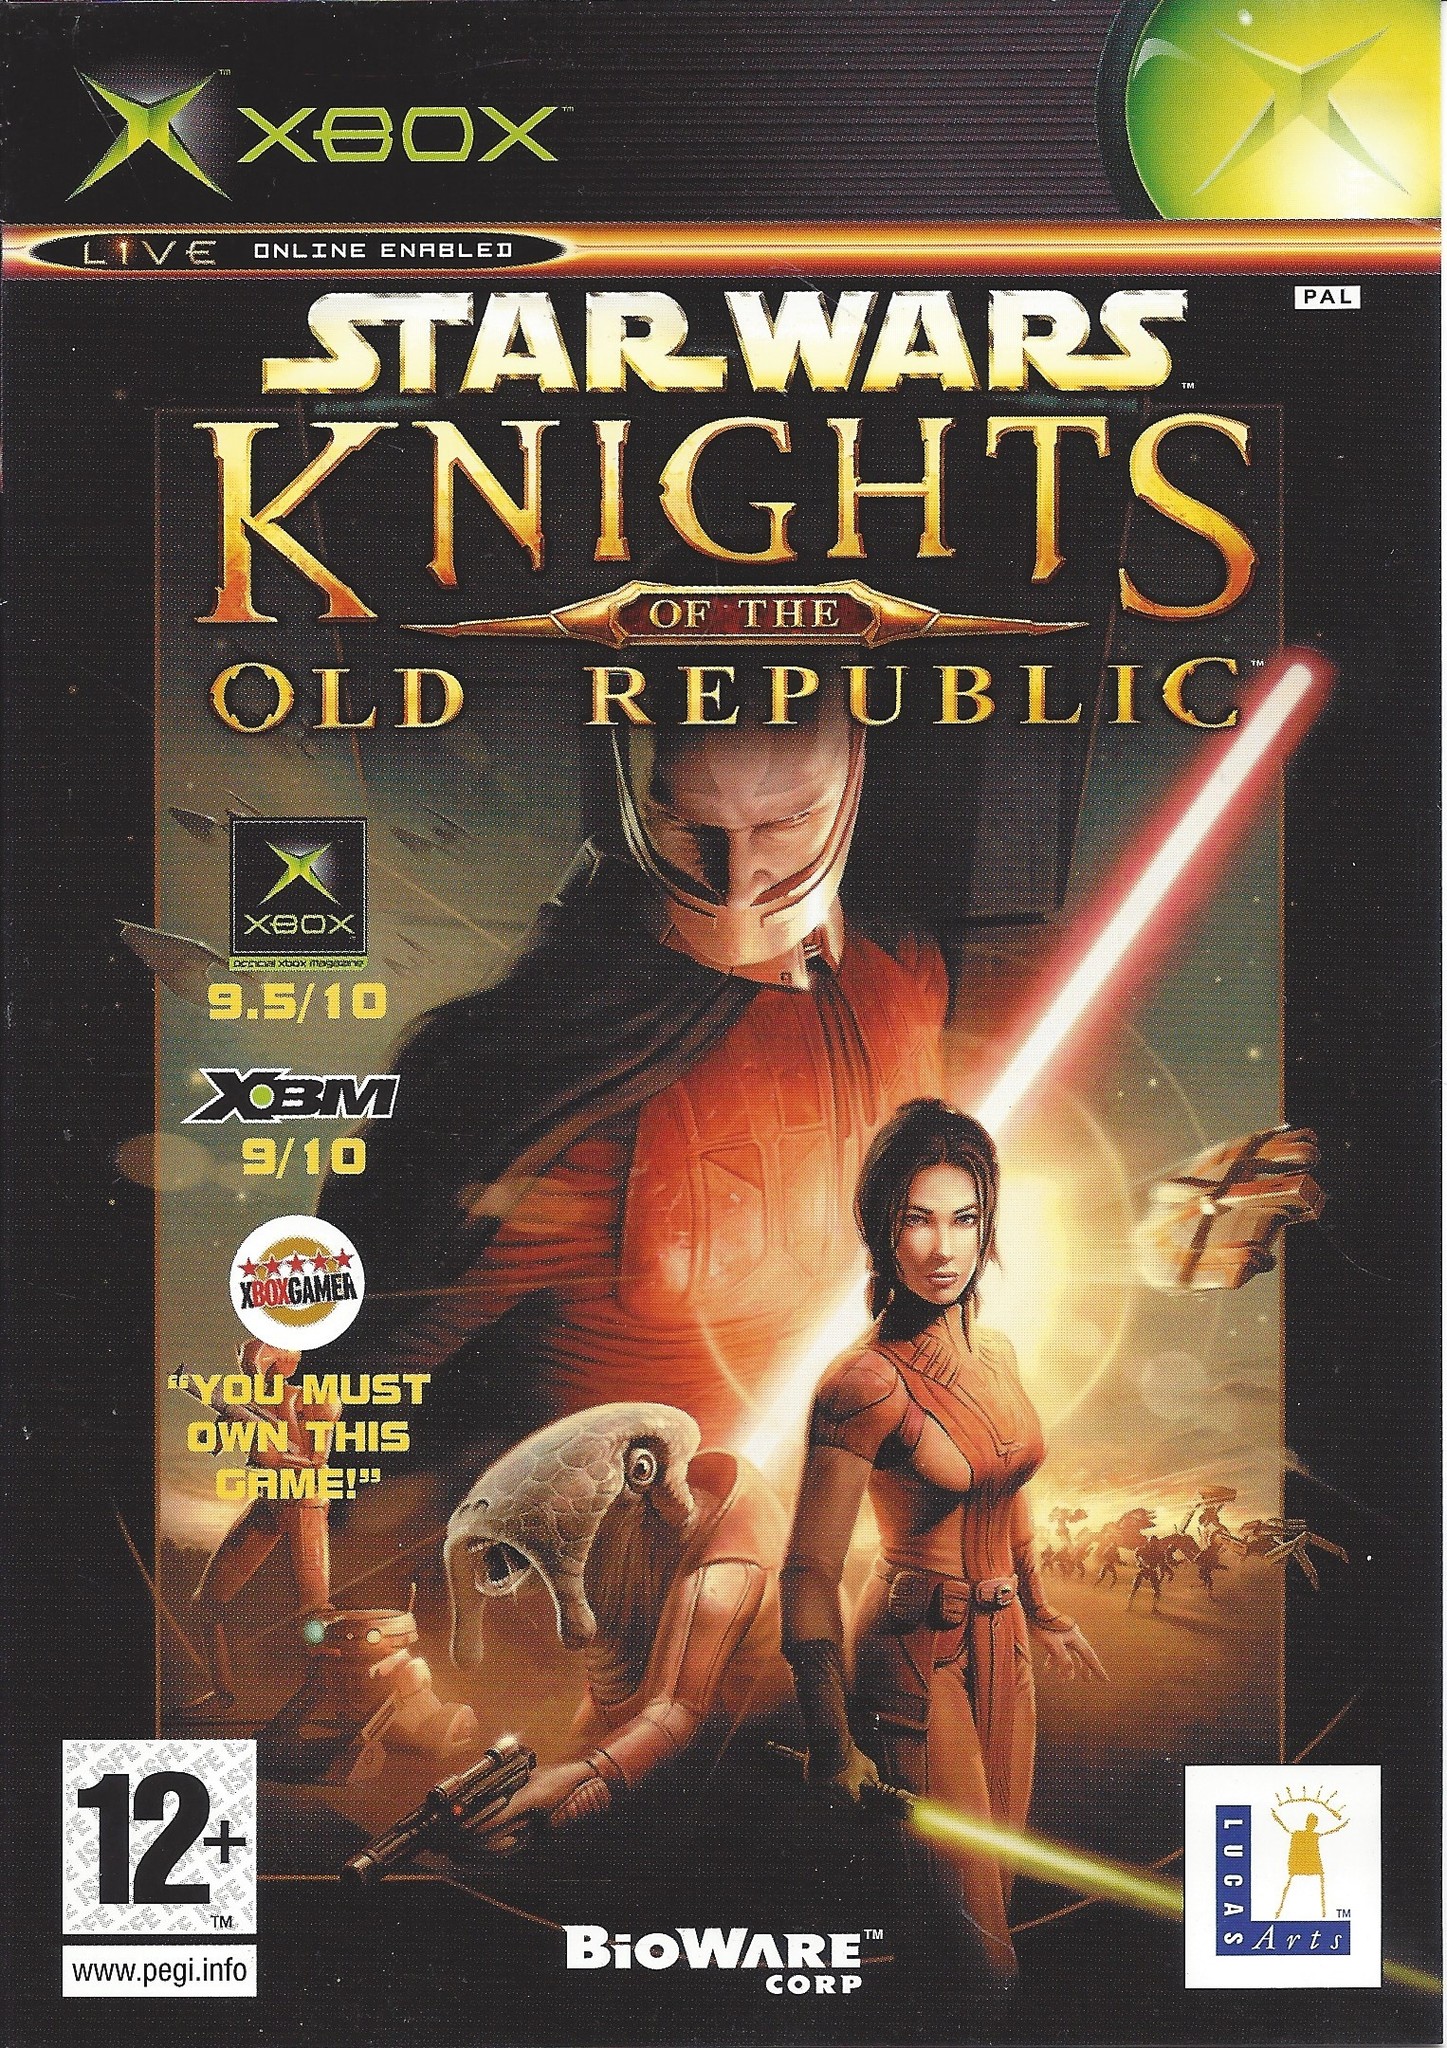 Star Wars of the Old Republic for Xbox - Passion for Games Webshop - Passion For Games